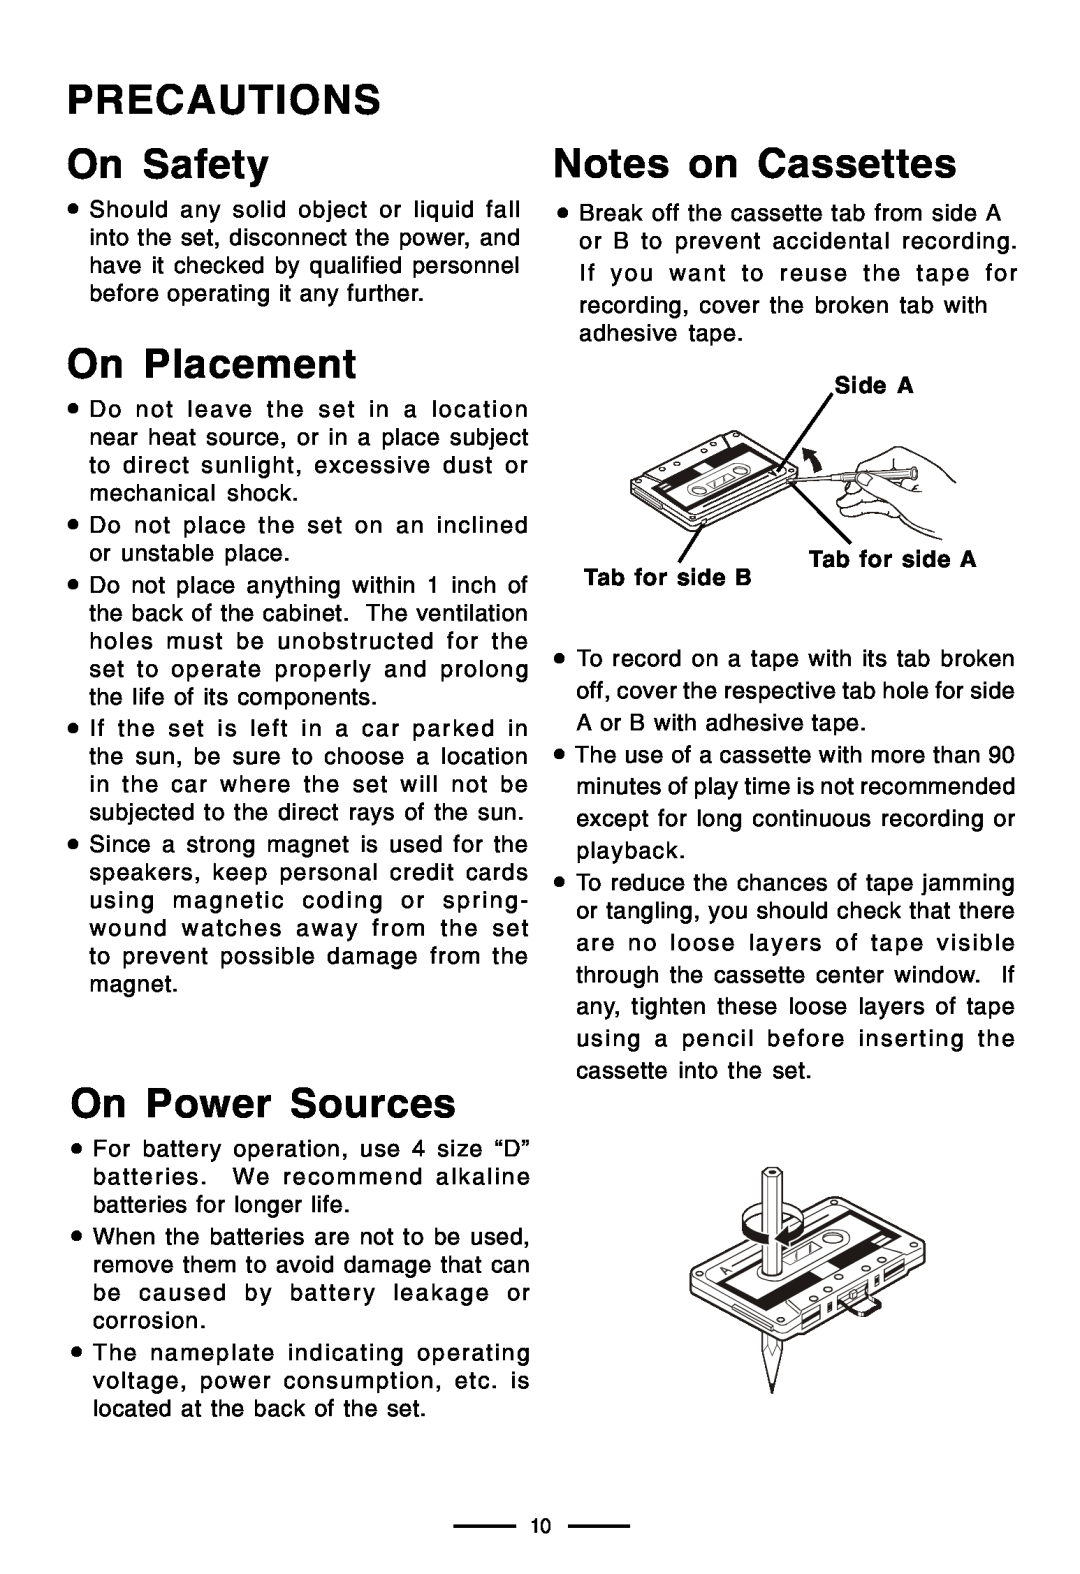 Lenoxx Electronics CT-99 operating instructions PRECAUTIONS On Safety, On Placement, Notes on Cassettes, On Power Sources 